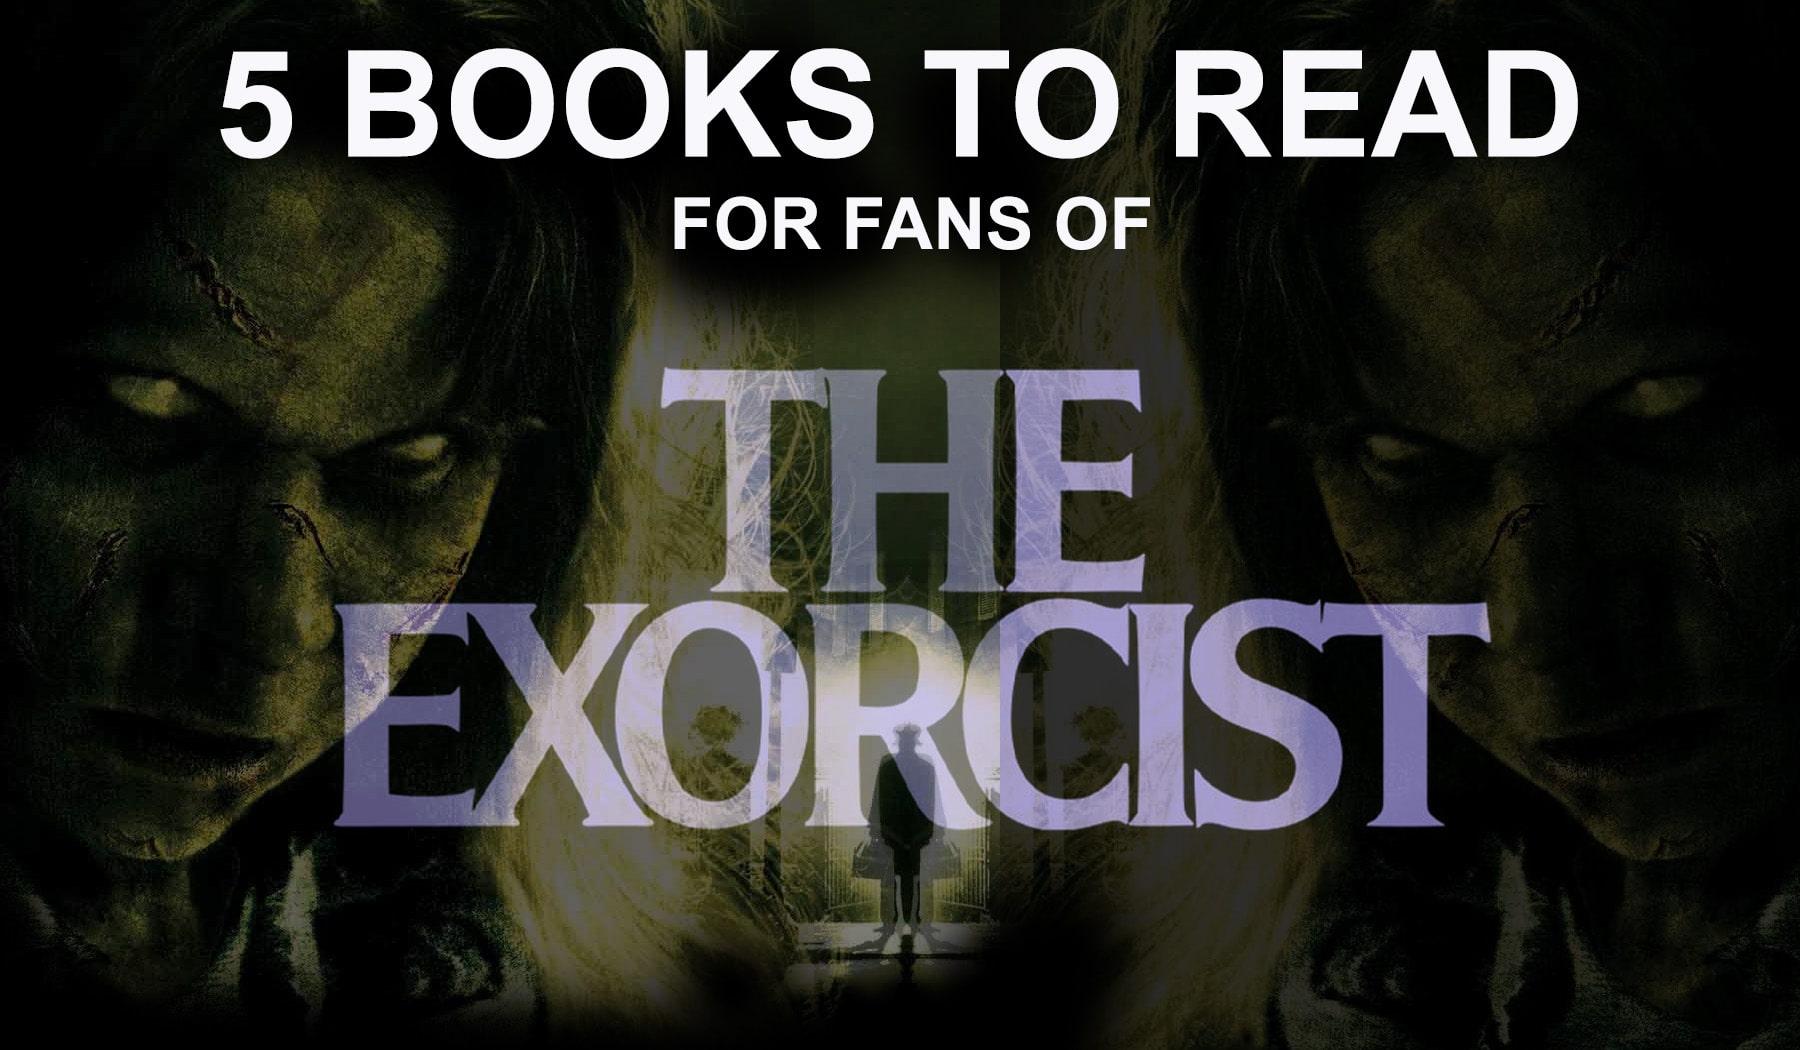 5 Books To Read For Fans Of The Exorcist